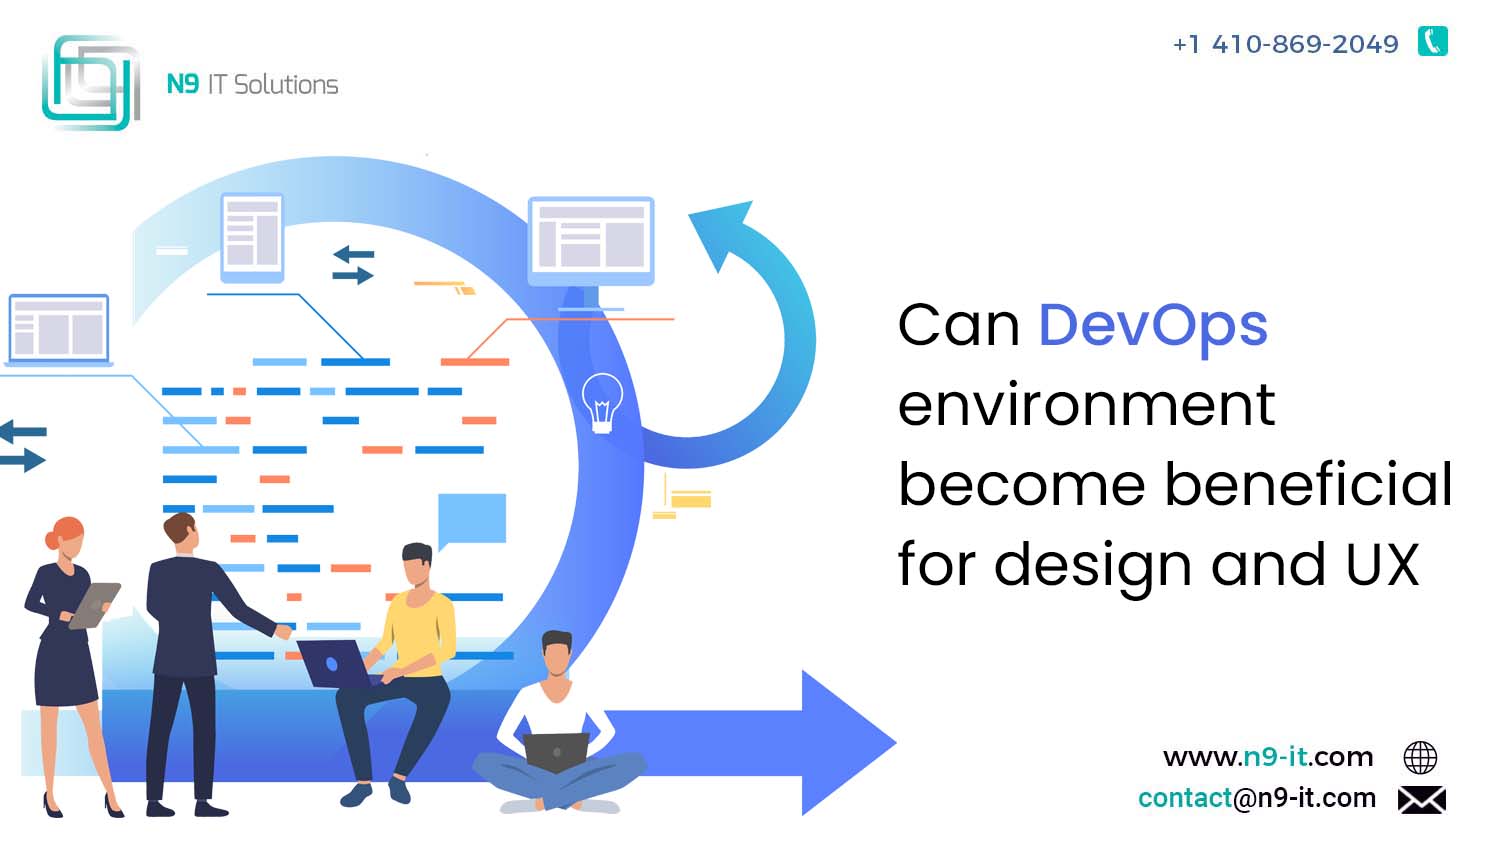 Can DevOps environment become beneficial for design and UX